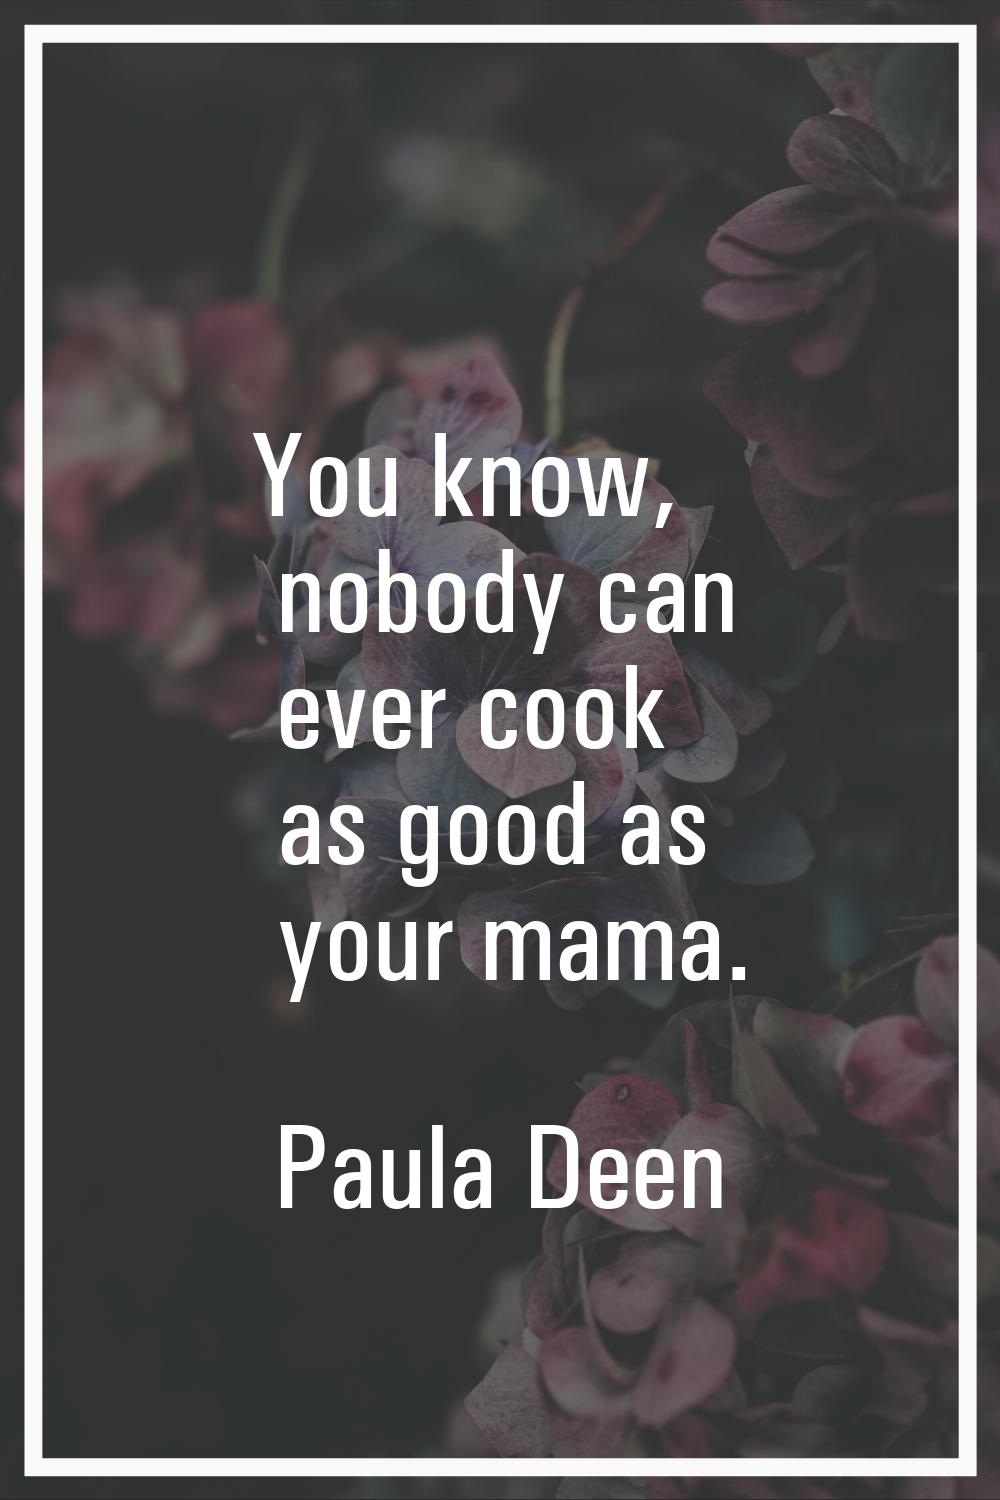 You know, nobody can ever cook as good as your mama.